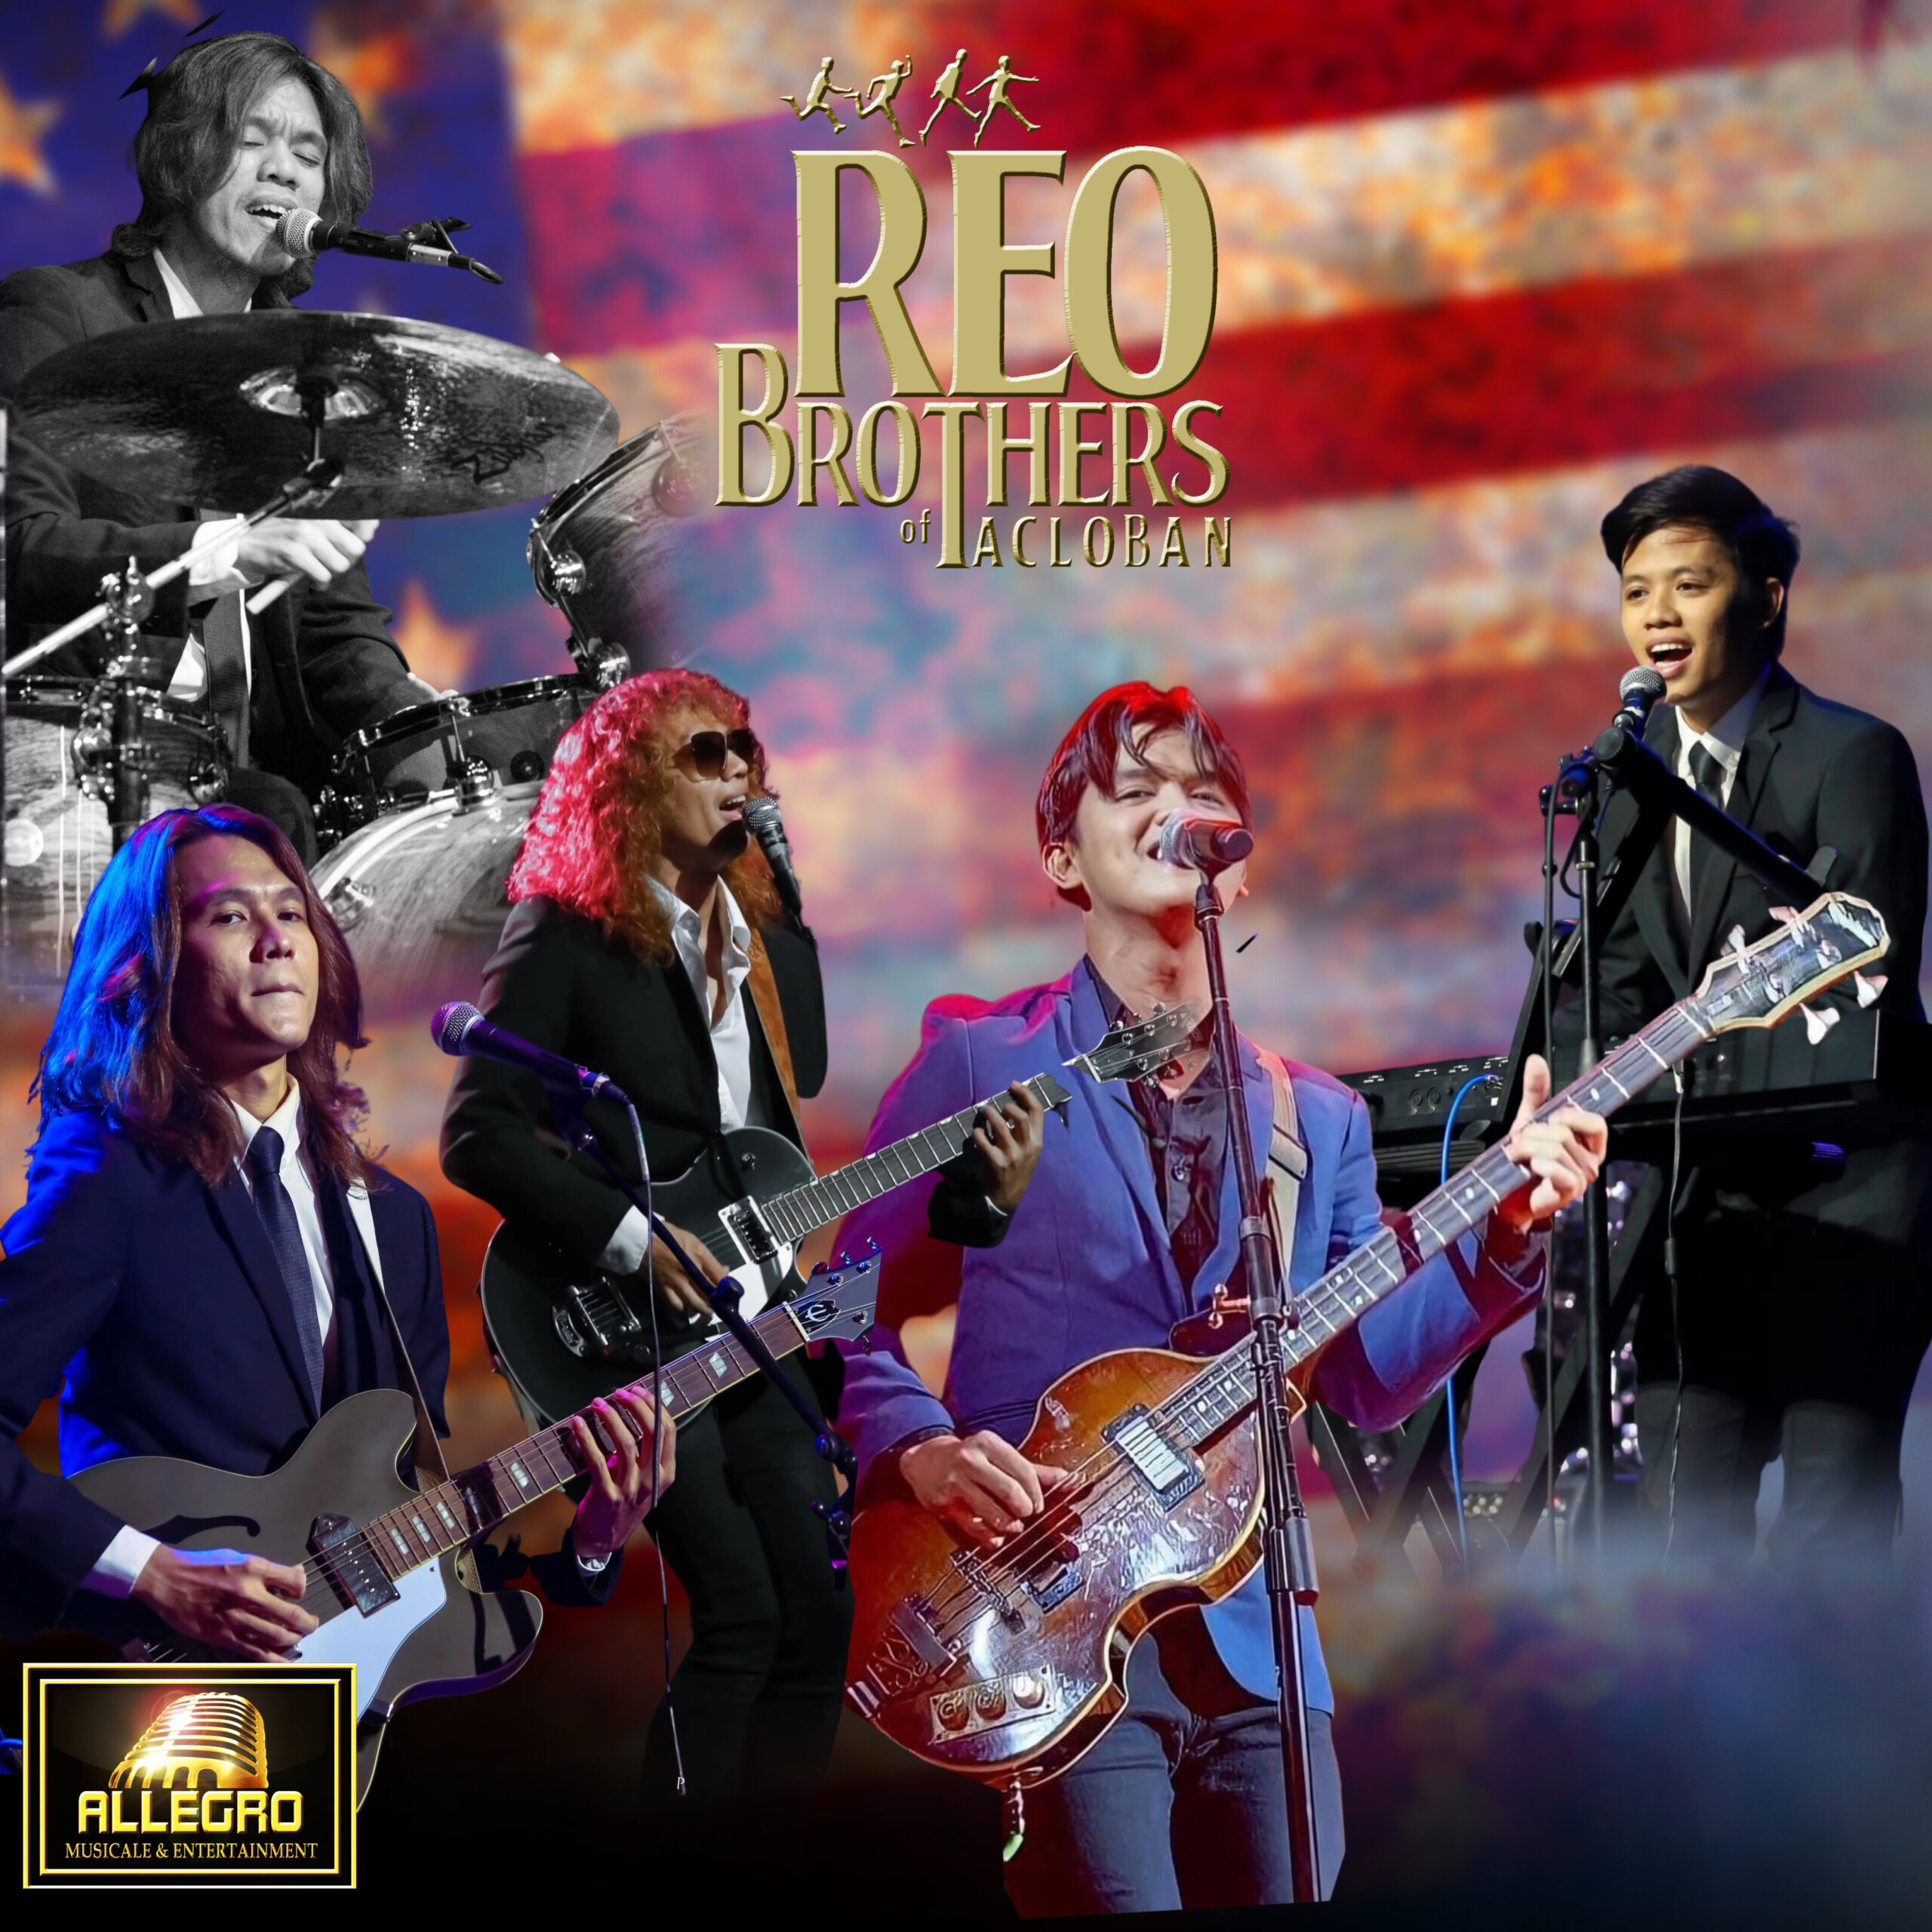 REO BROTHERS “The Philippine Beatles” Tribute to Your Favorite Rock